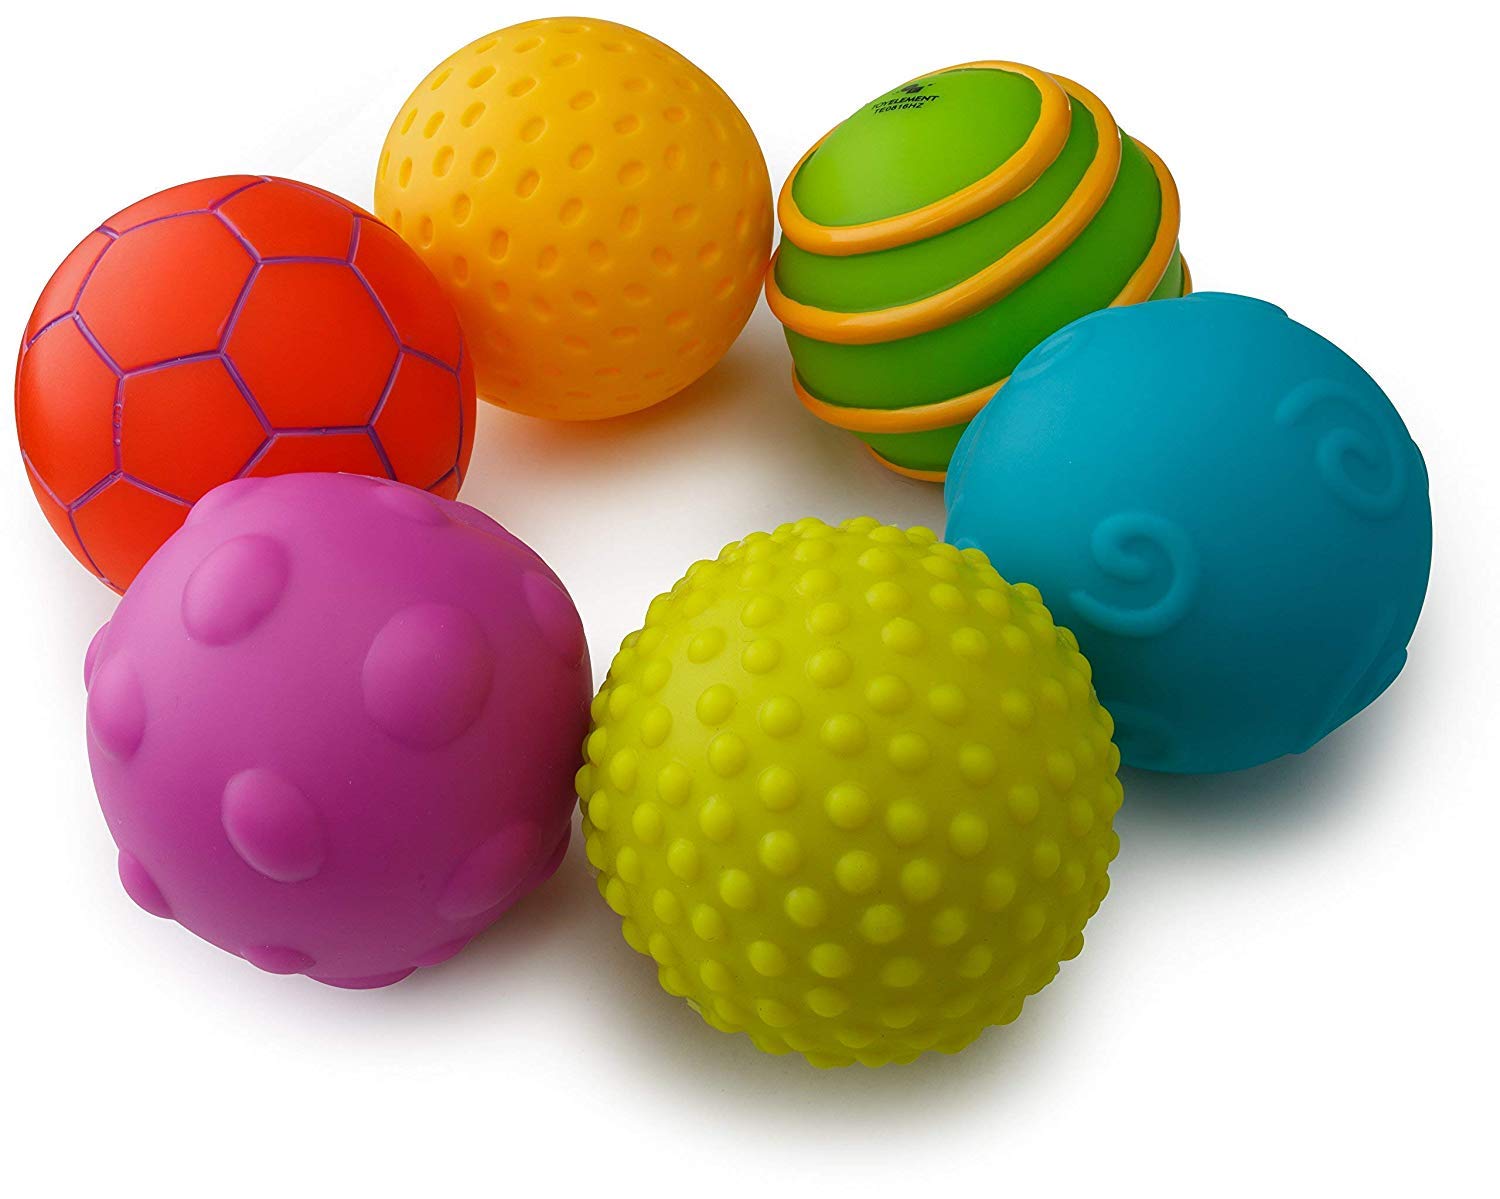 Playkidz Sensory Balls for Baby, Soft & Textured Balls for Babies & Toddlers, Super Durable 6 Pack, Stress Relief Toy for Kids & Sensory Balls for Toddlers